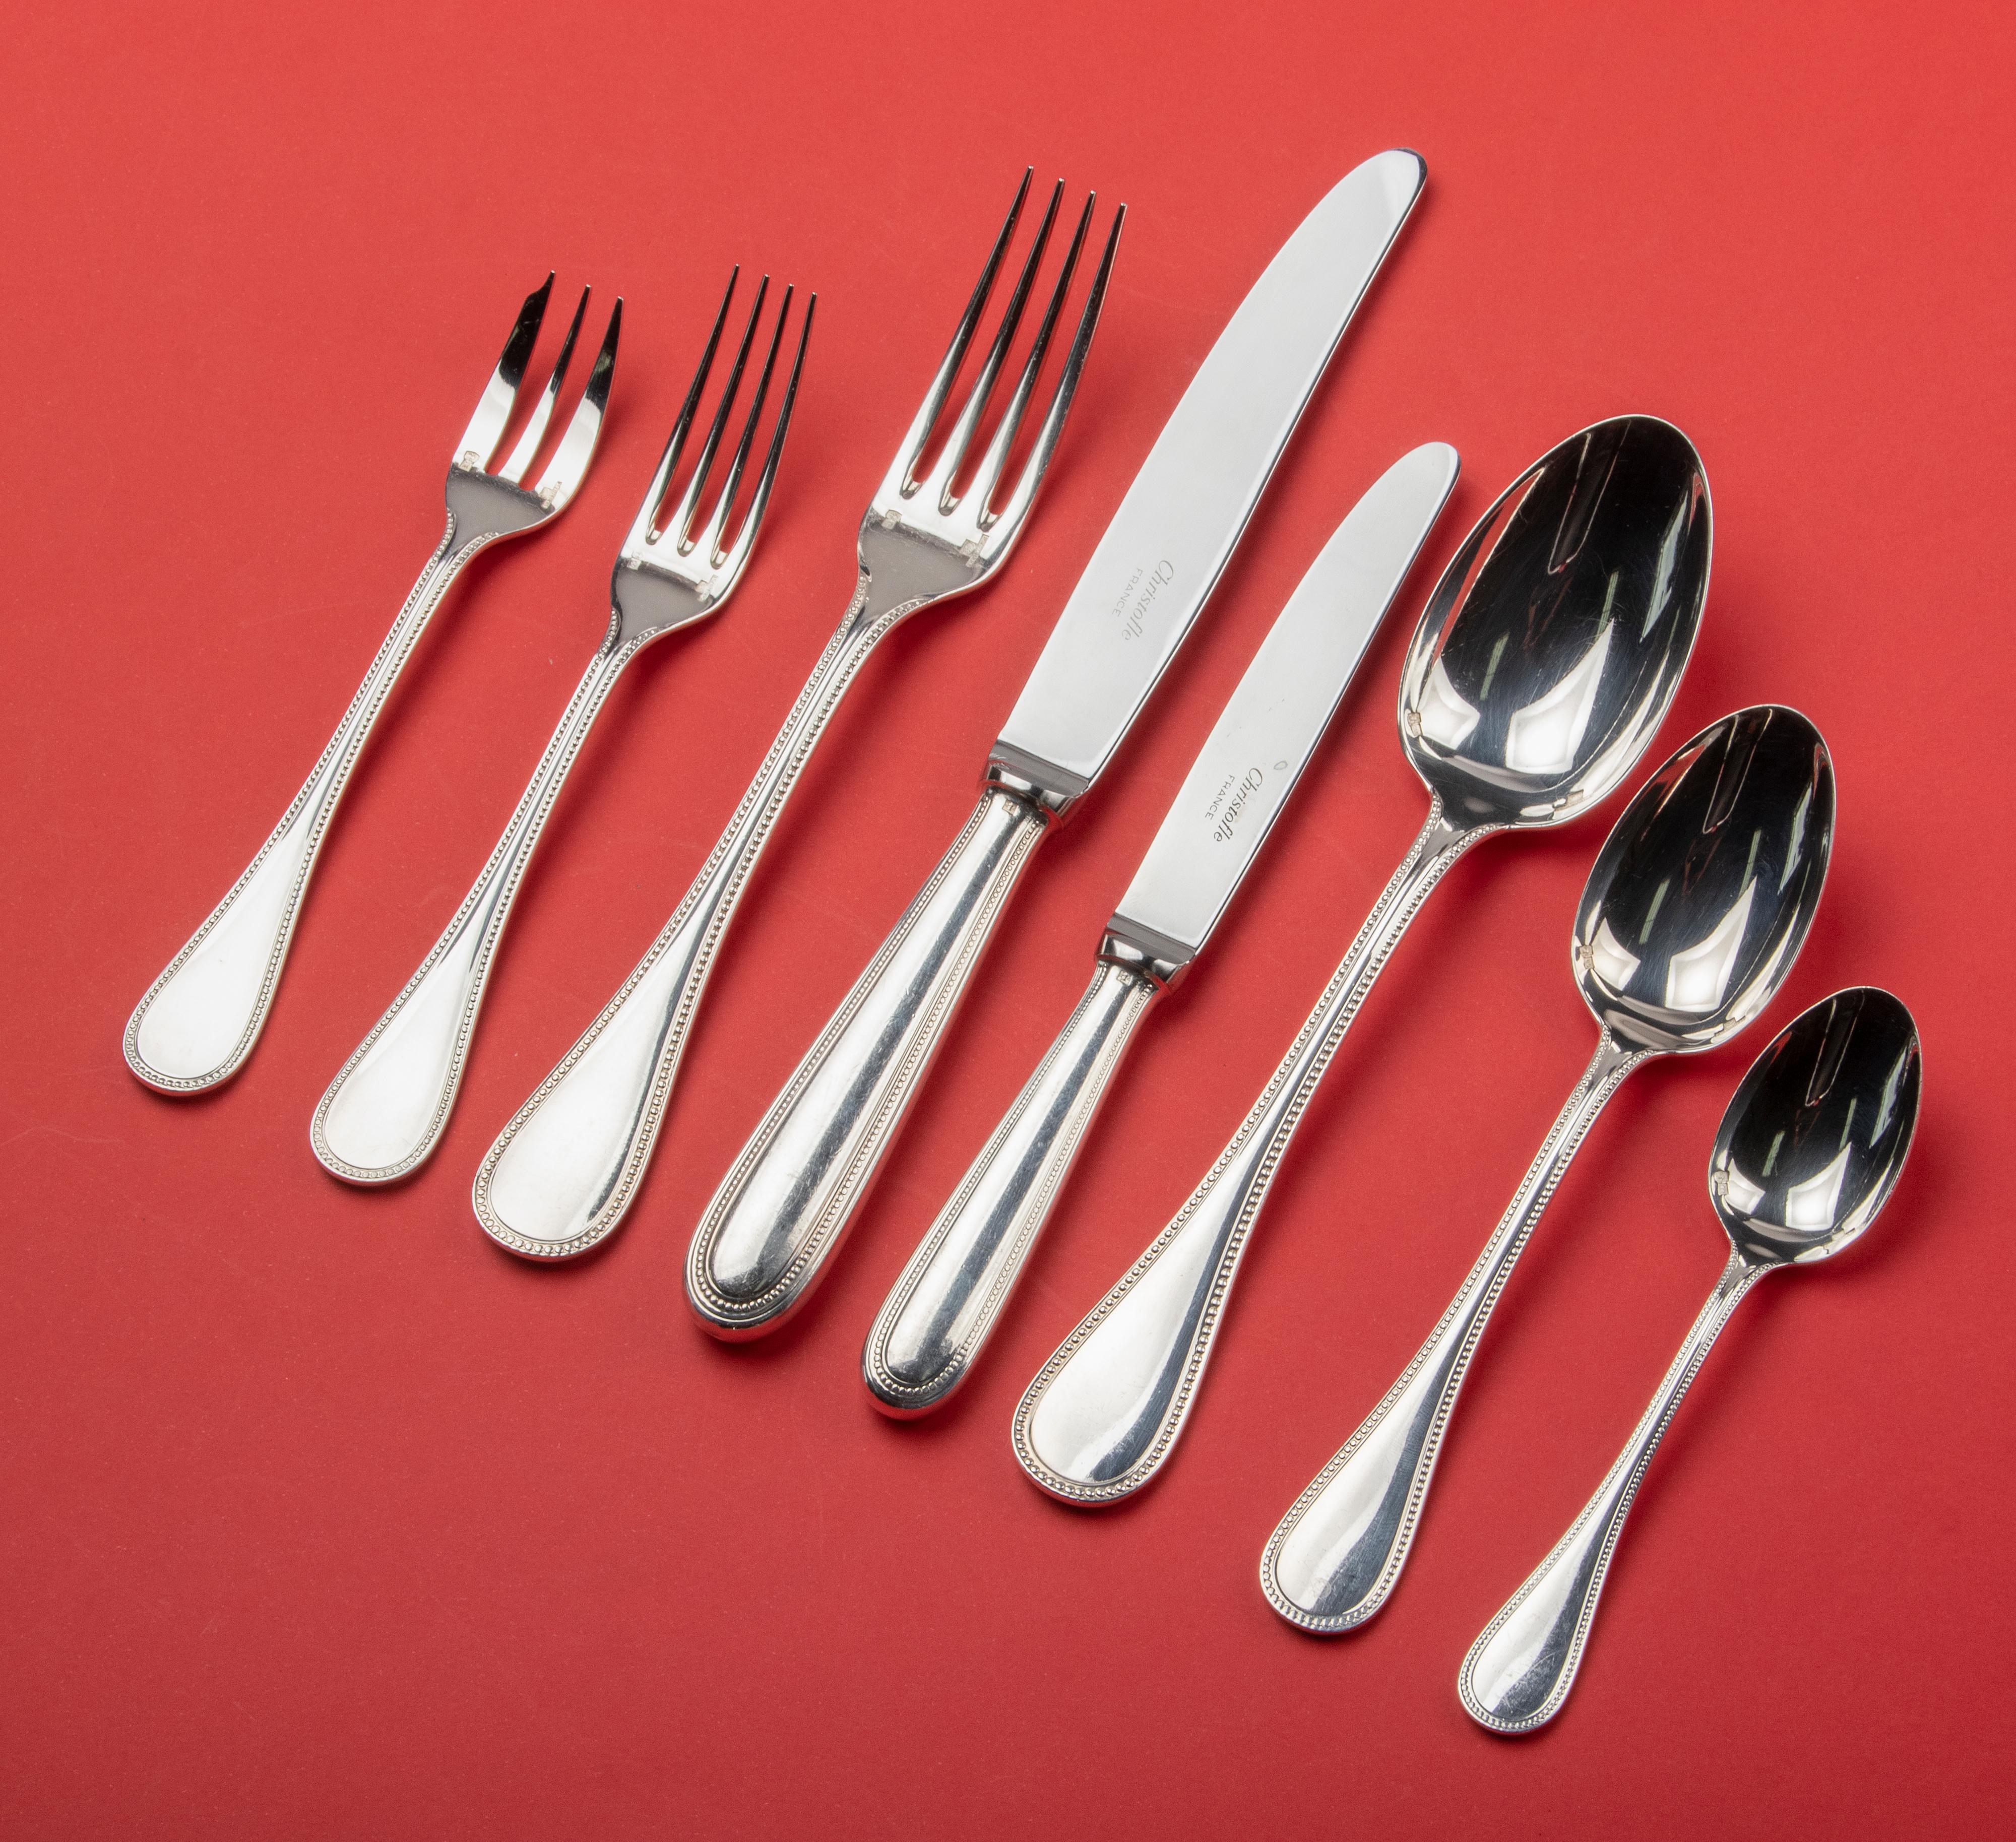 Beautiful set of silver-plated table cutlery in original box by the French brand Christofle. The model is Perles. This timeless and classic pattern will suit any table setting. The cutlery is composed as follows: 12 table knives, 12 table forks, 12